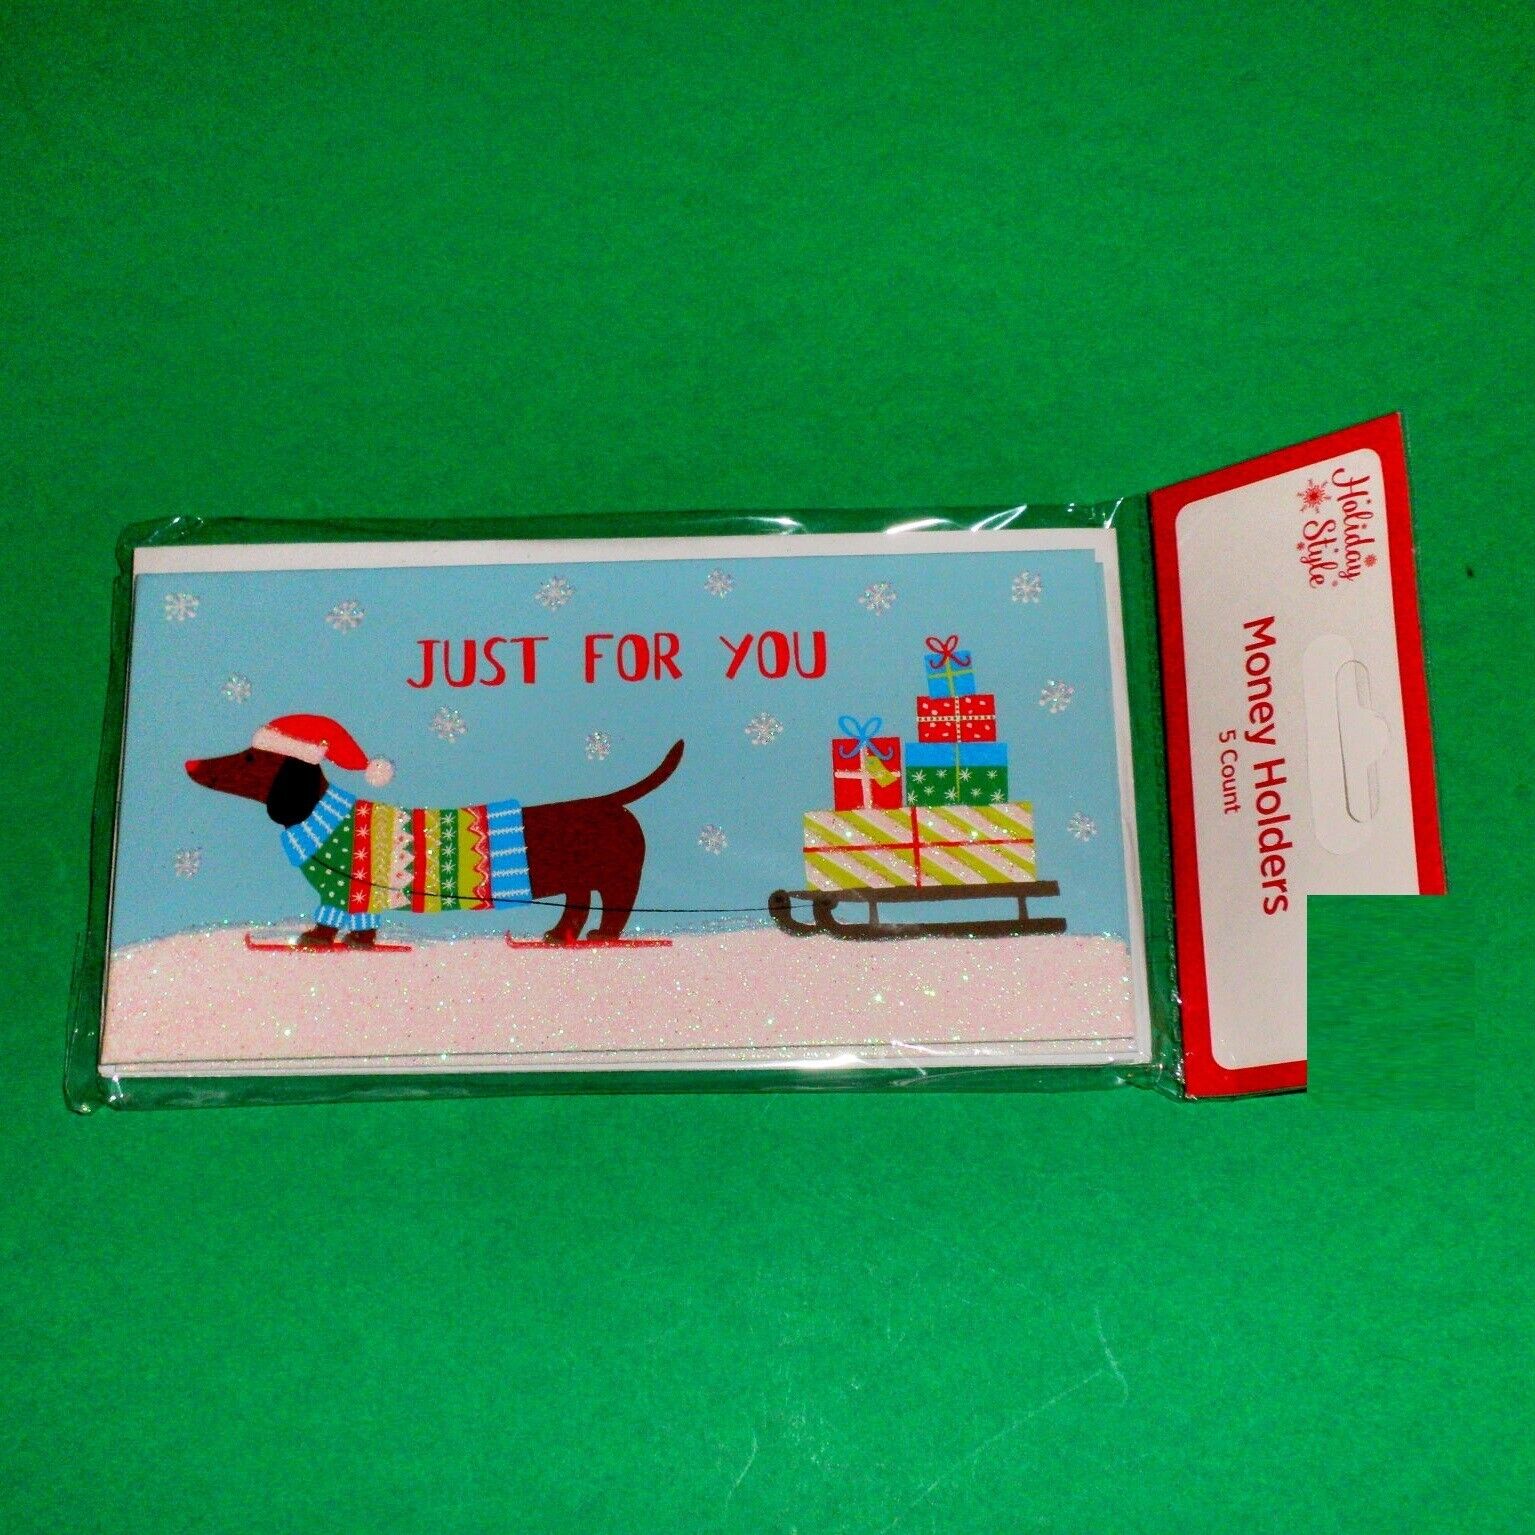 Pack of 5 Dachshund & Sled Just For You Christmas Cards with Money Holder Pocket